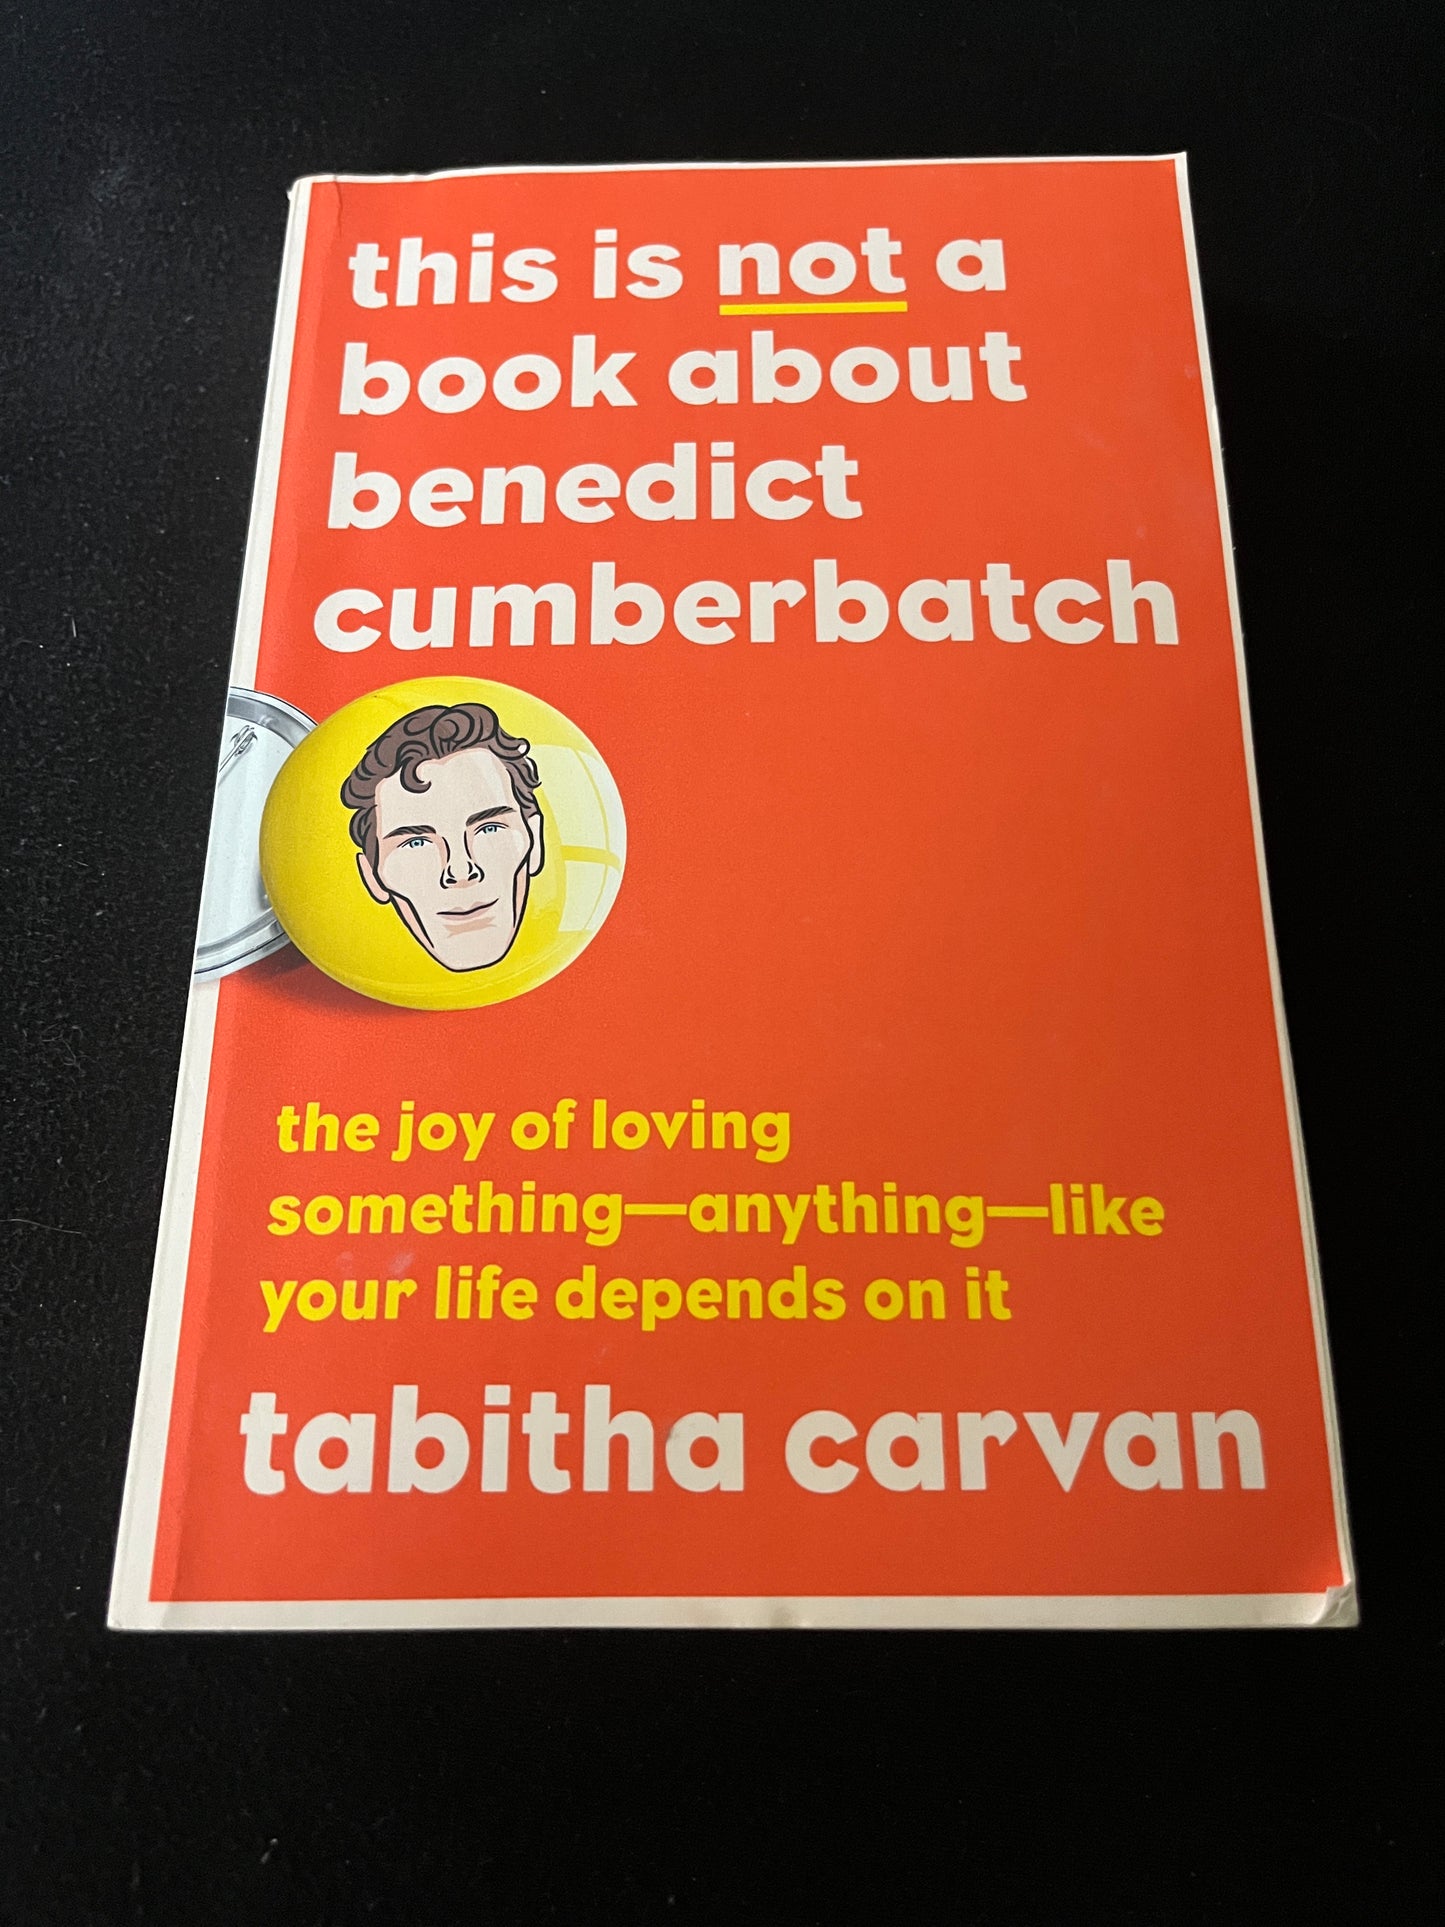 THE IS NOT A BOOK ABOUT BENEDICT CUMBERBATCH: The Joy of Loving Something- Anything- Like Your Life Depends on It by Tabitha Carvan